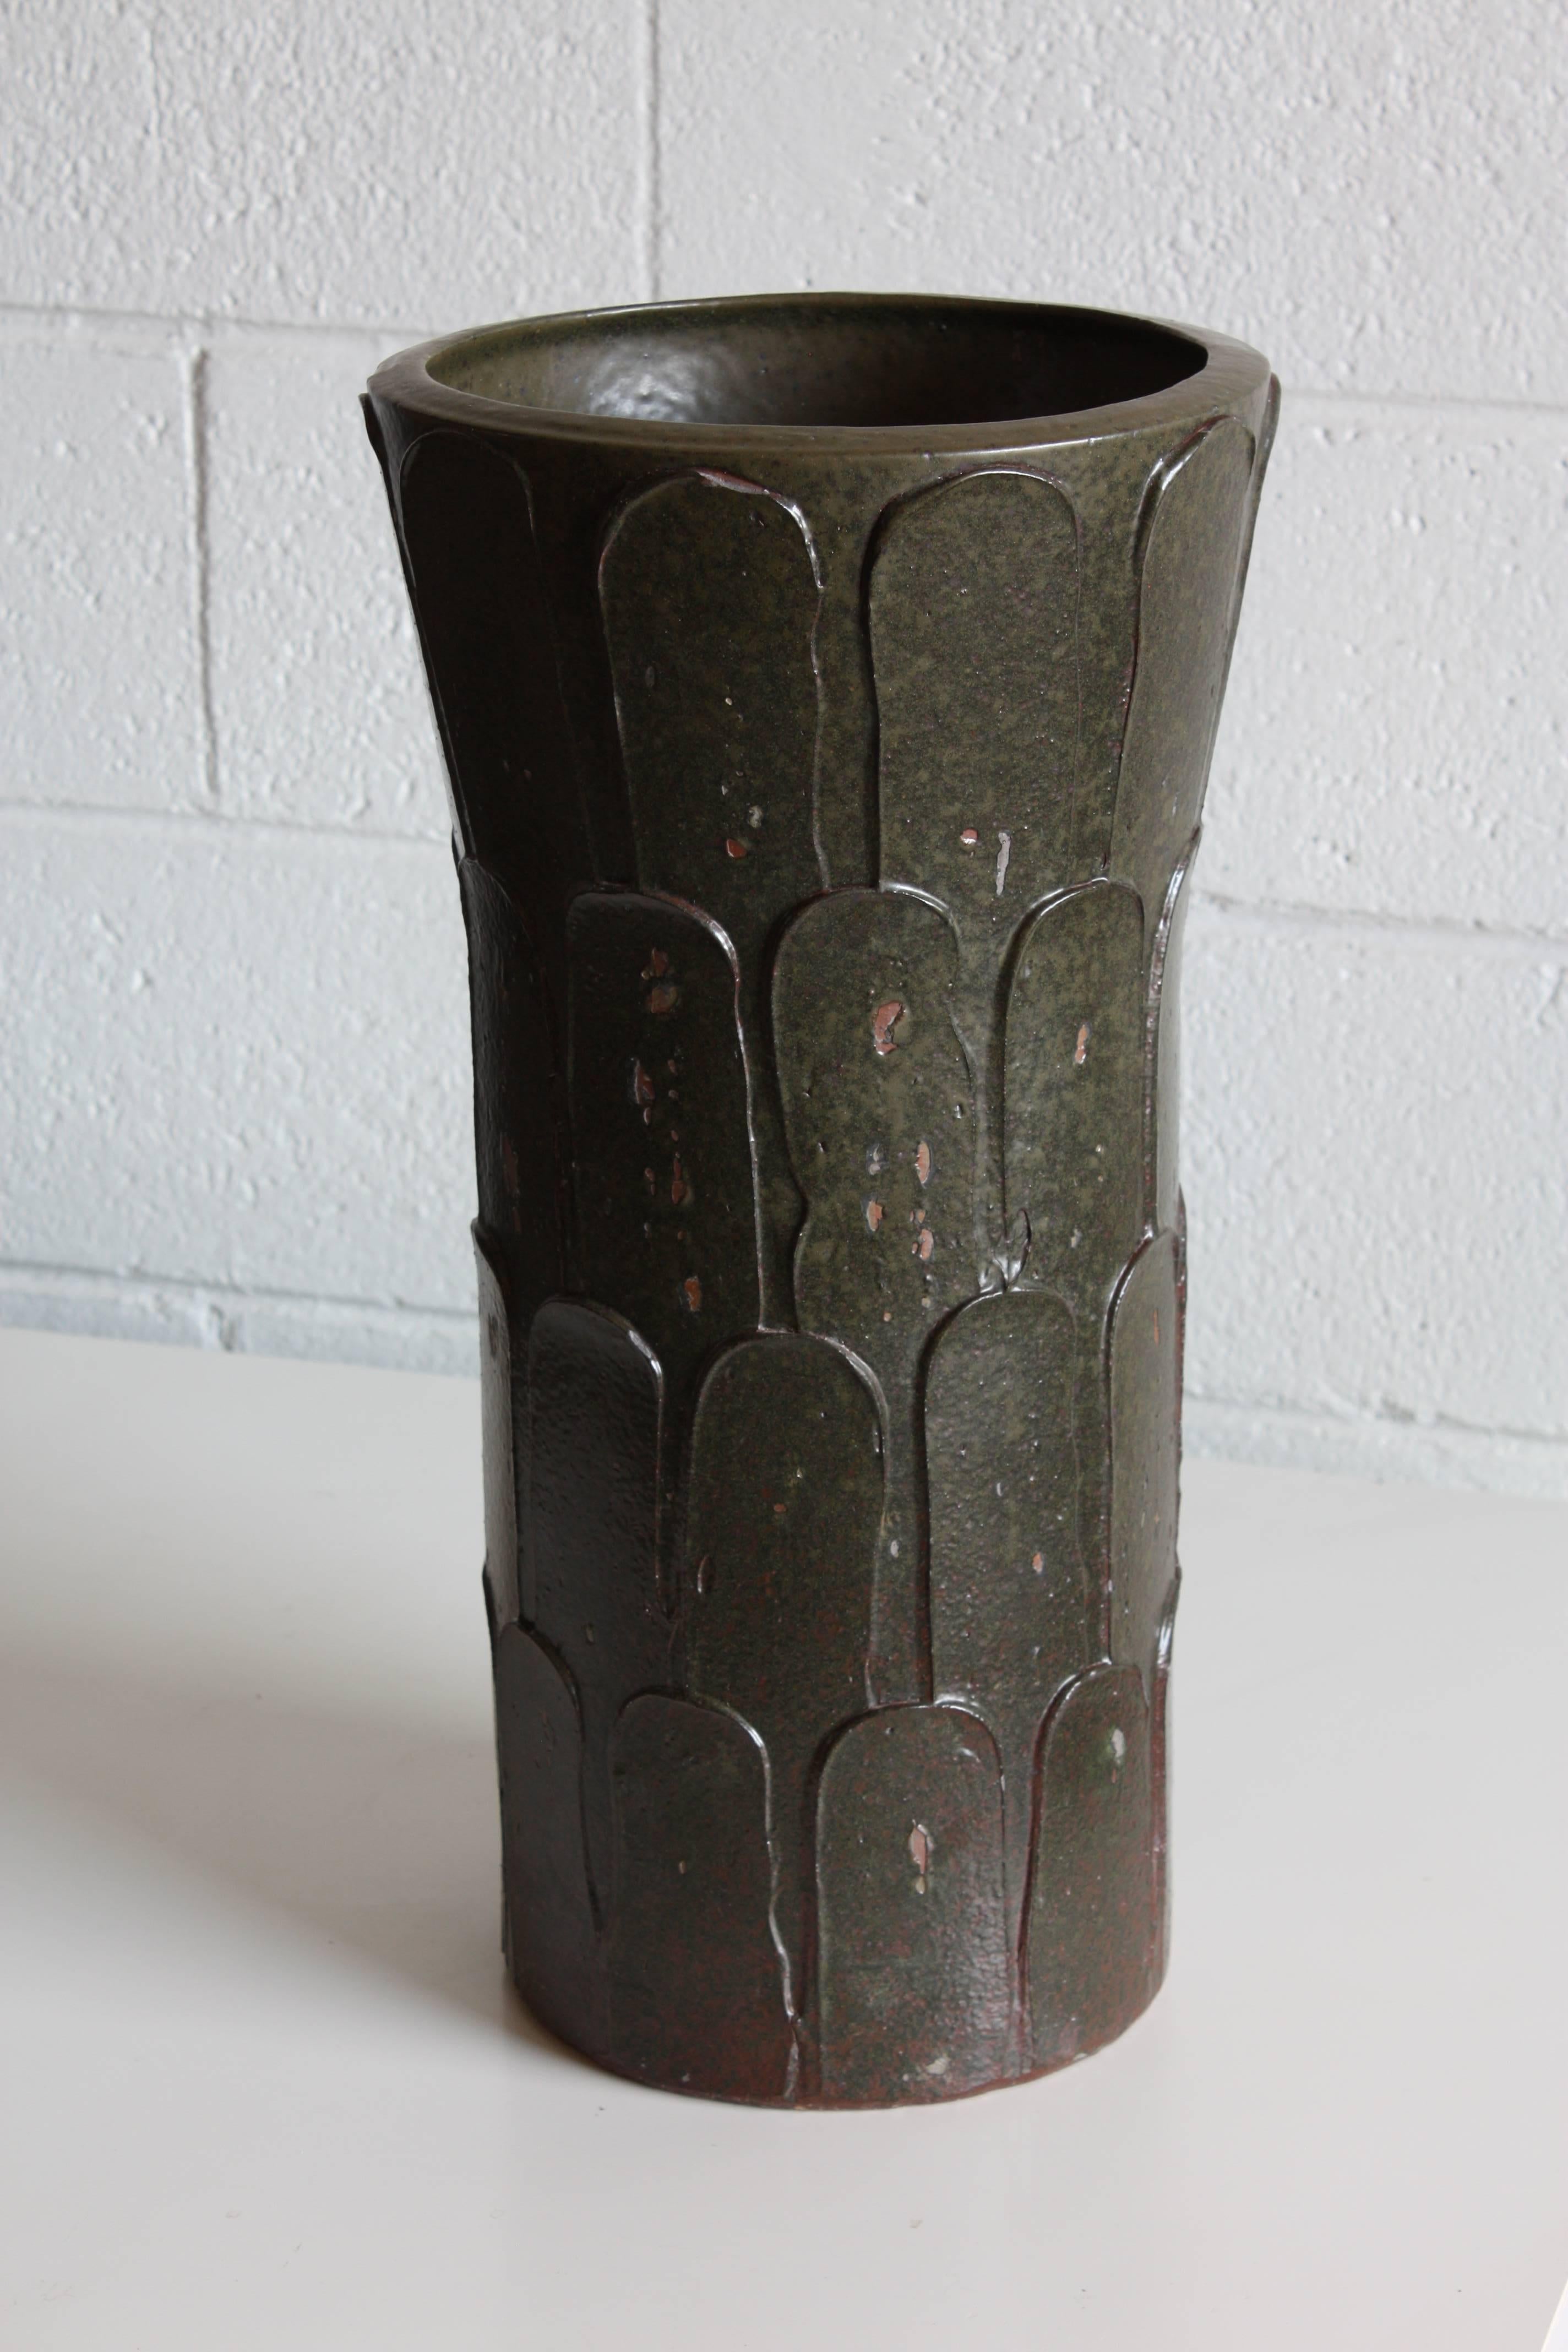 Rare glazed pot or umbrella stand by David Cressey for Architectural Pottery, pro or artisan series. From the curated collection Space 20th Century Modern.